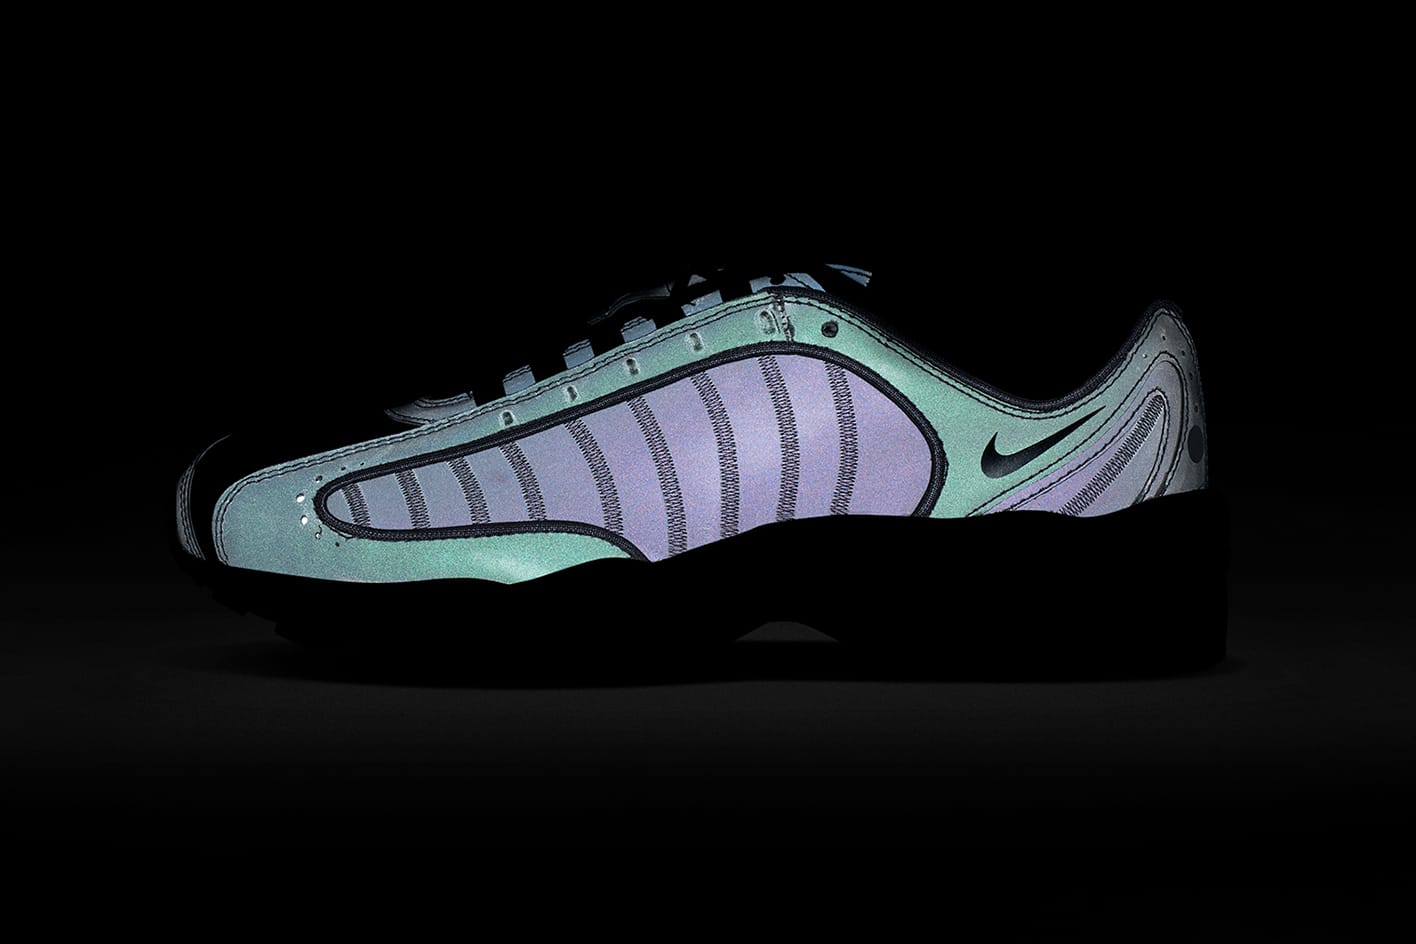 Nike Air Max Tailwind IV 99 Reflective SP Release | Hypebeast